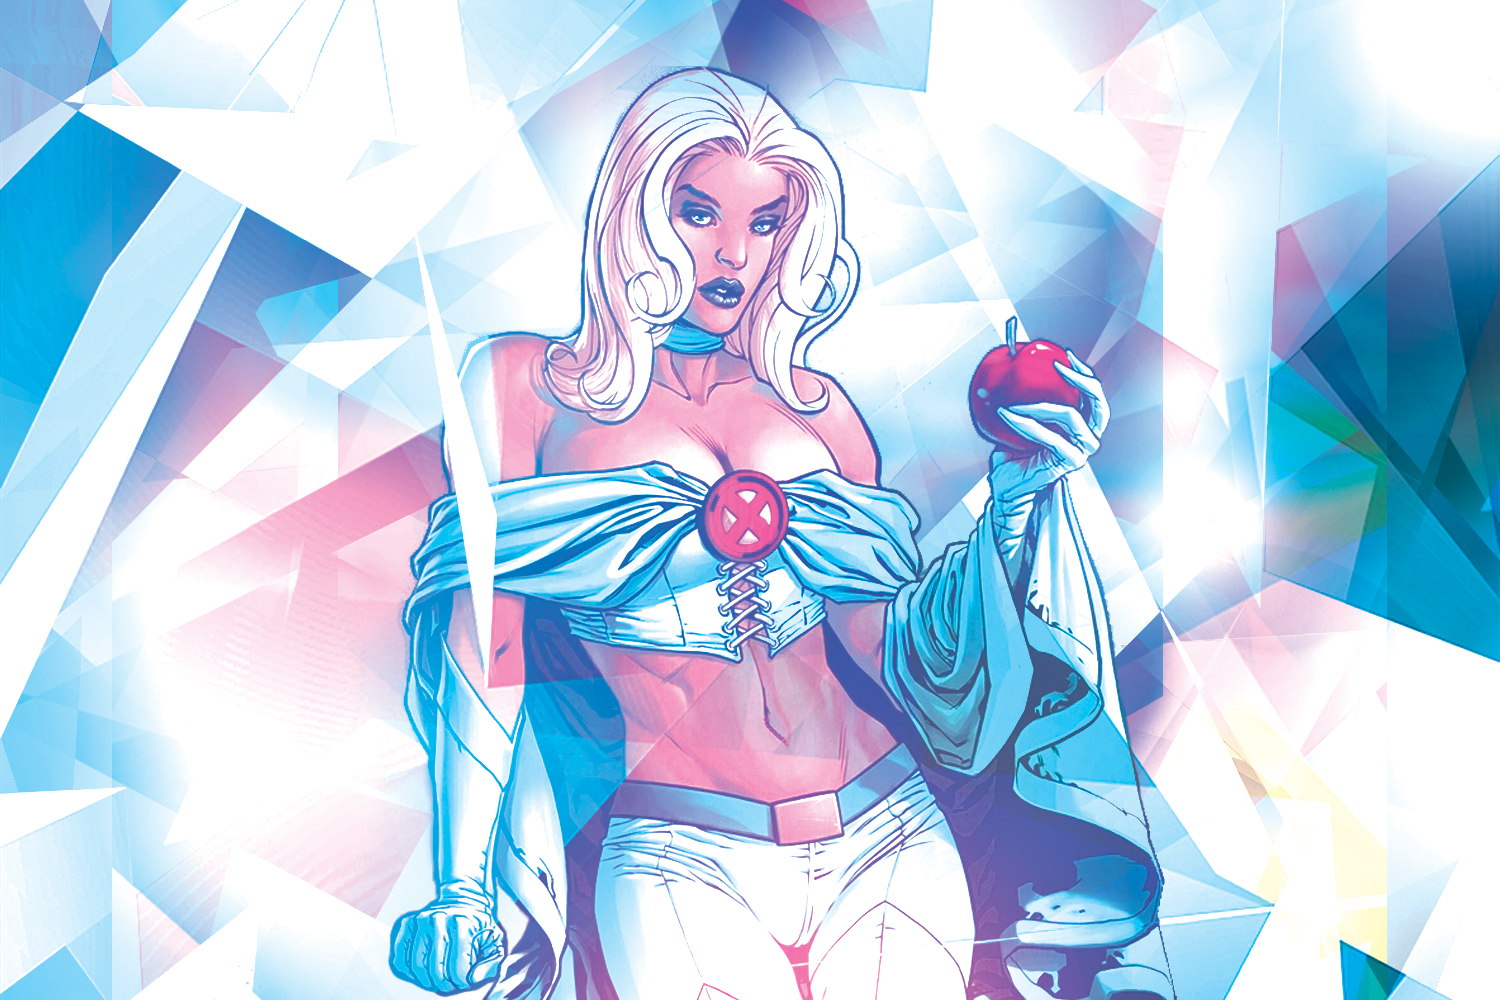 The Flawless Professor - A look at Emma Frost, the educator